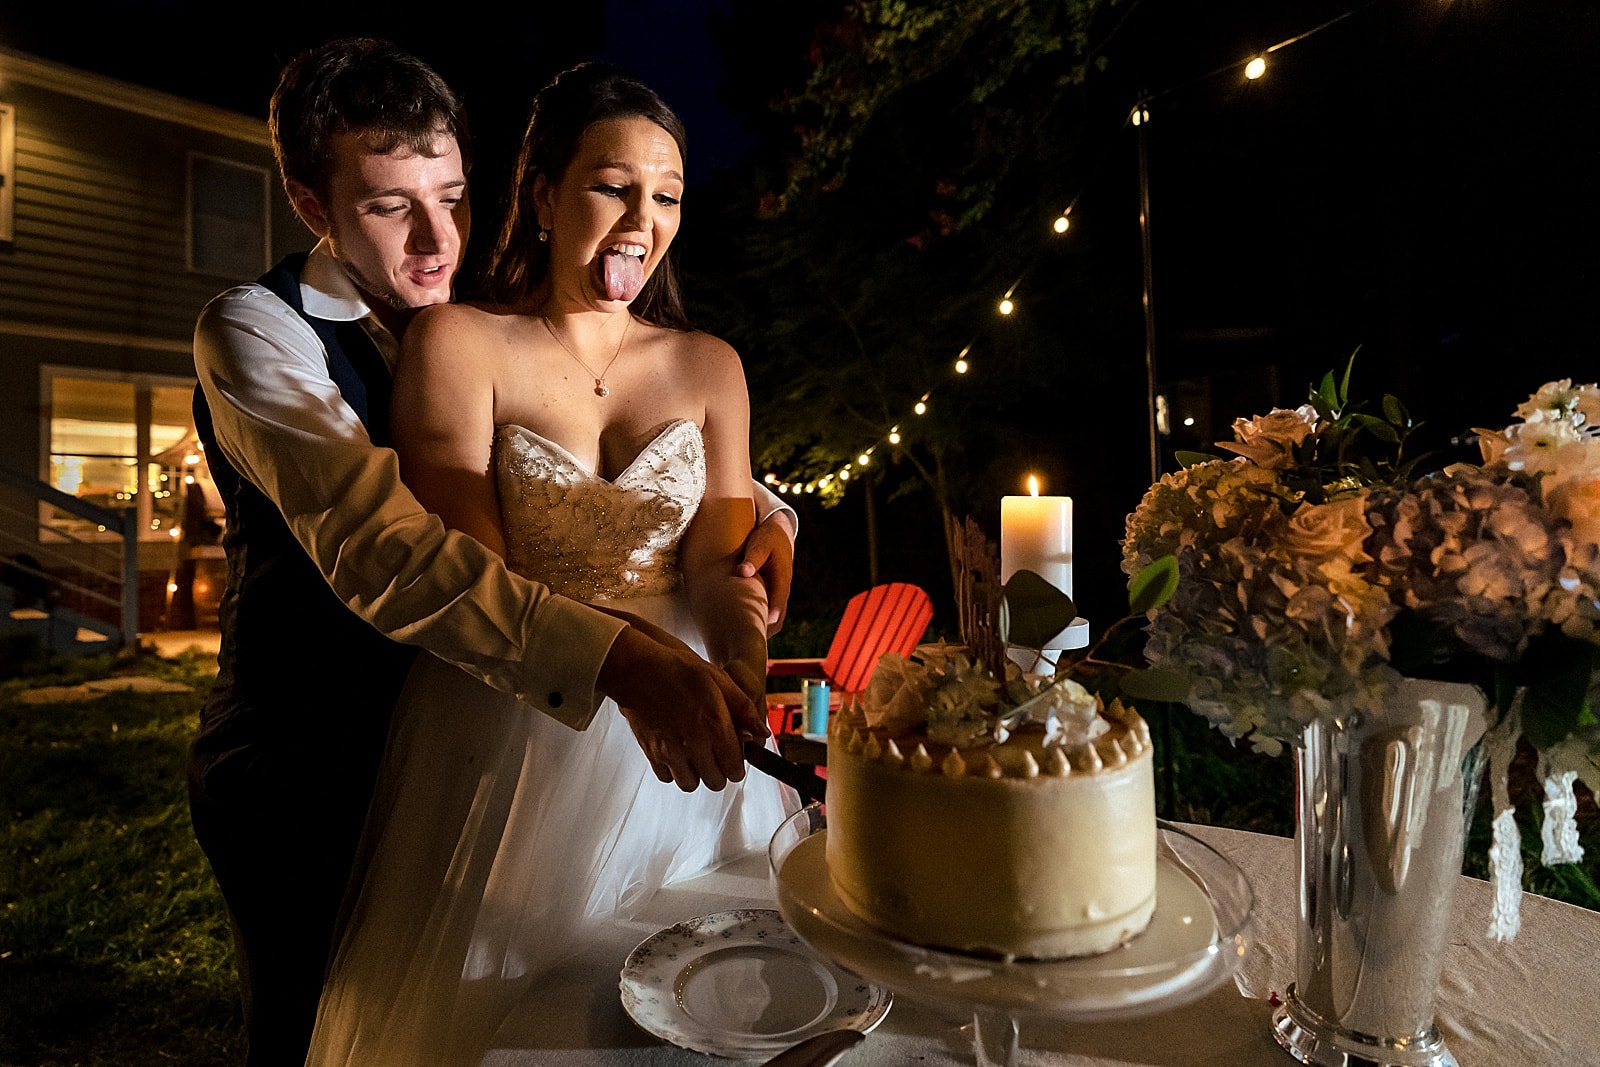 If you're having an al fresco wedding reception, make sure you get a photographer who knows how to light up the dark